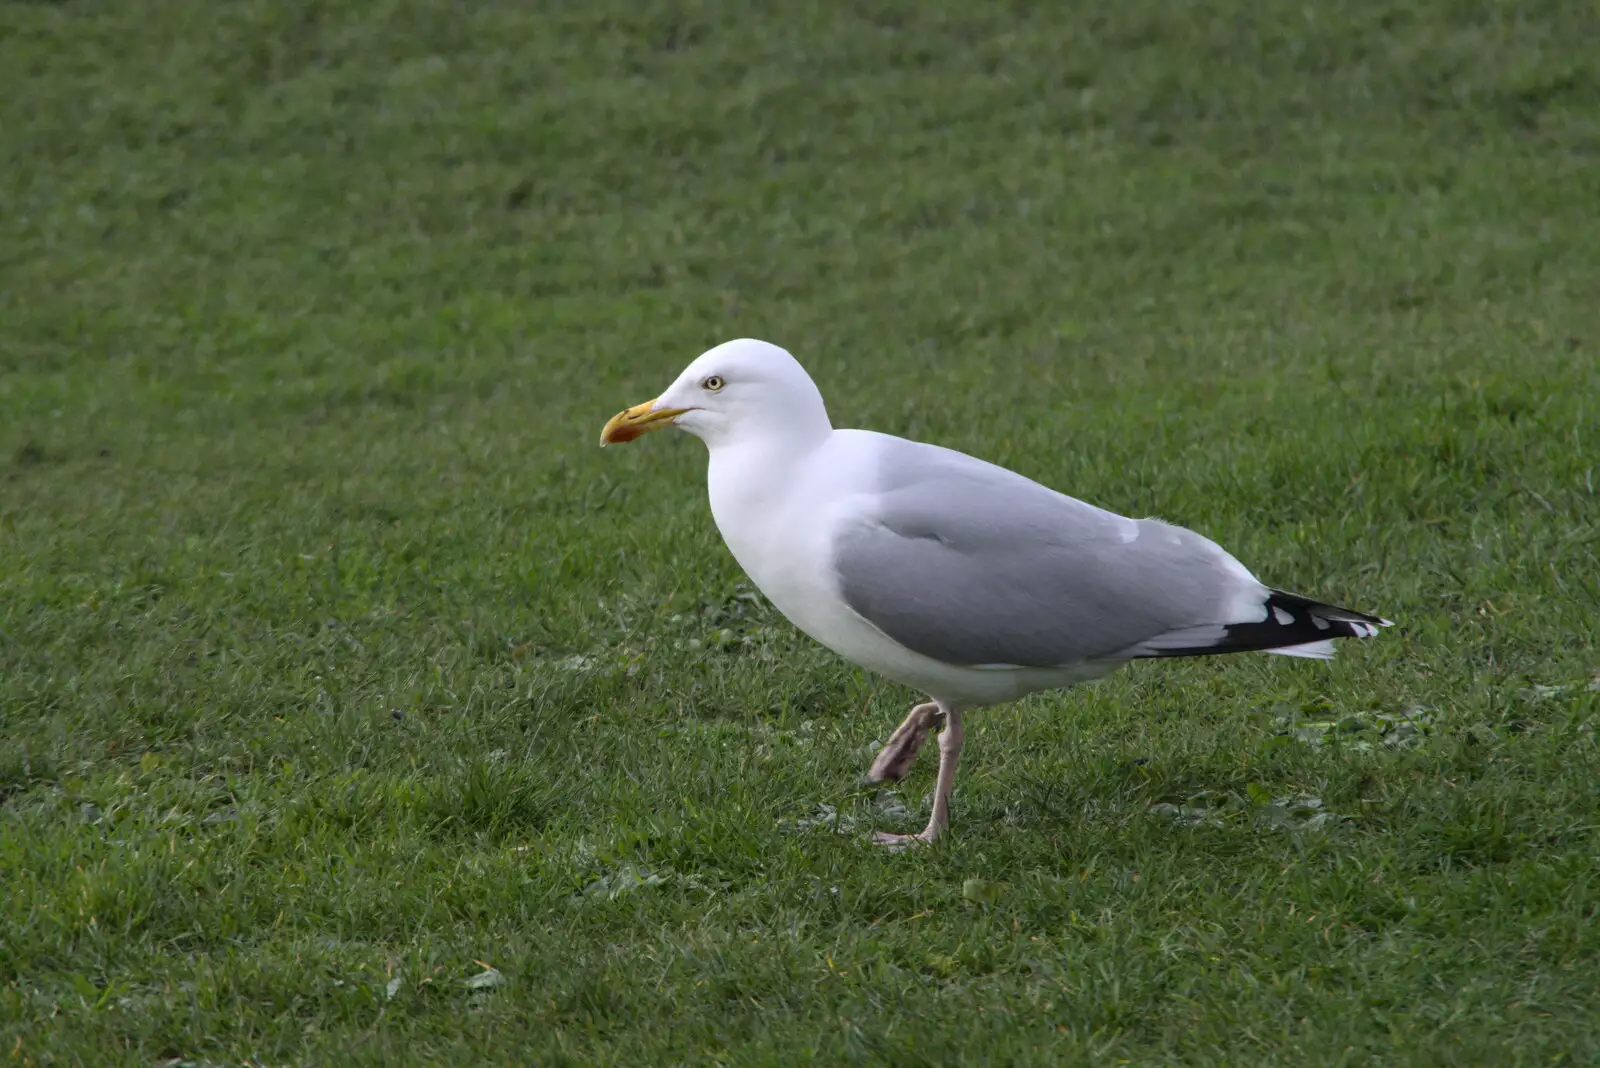 A herring gull does a dance for worms, from The Dead Zoo, Dublin, Ireland - 17th February 2023